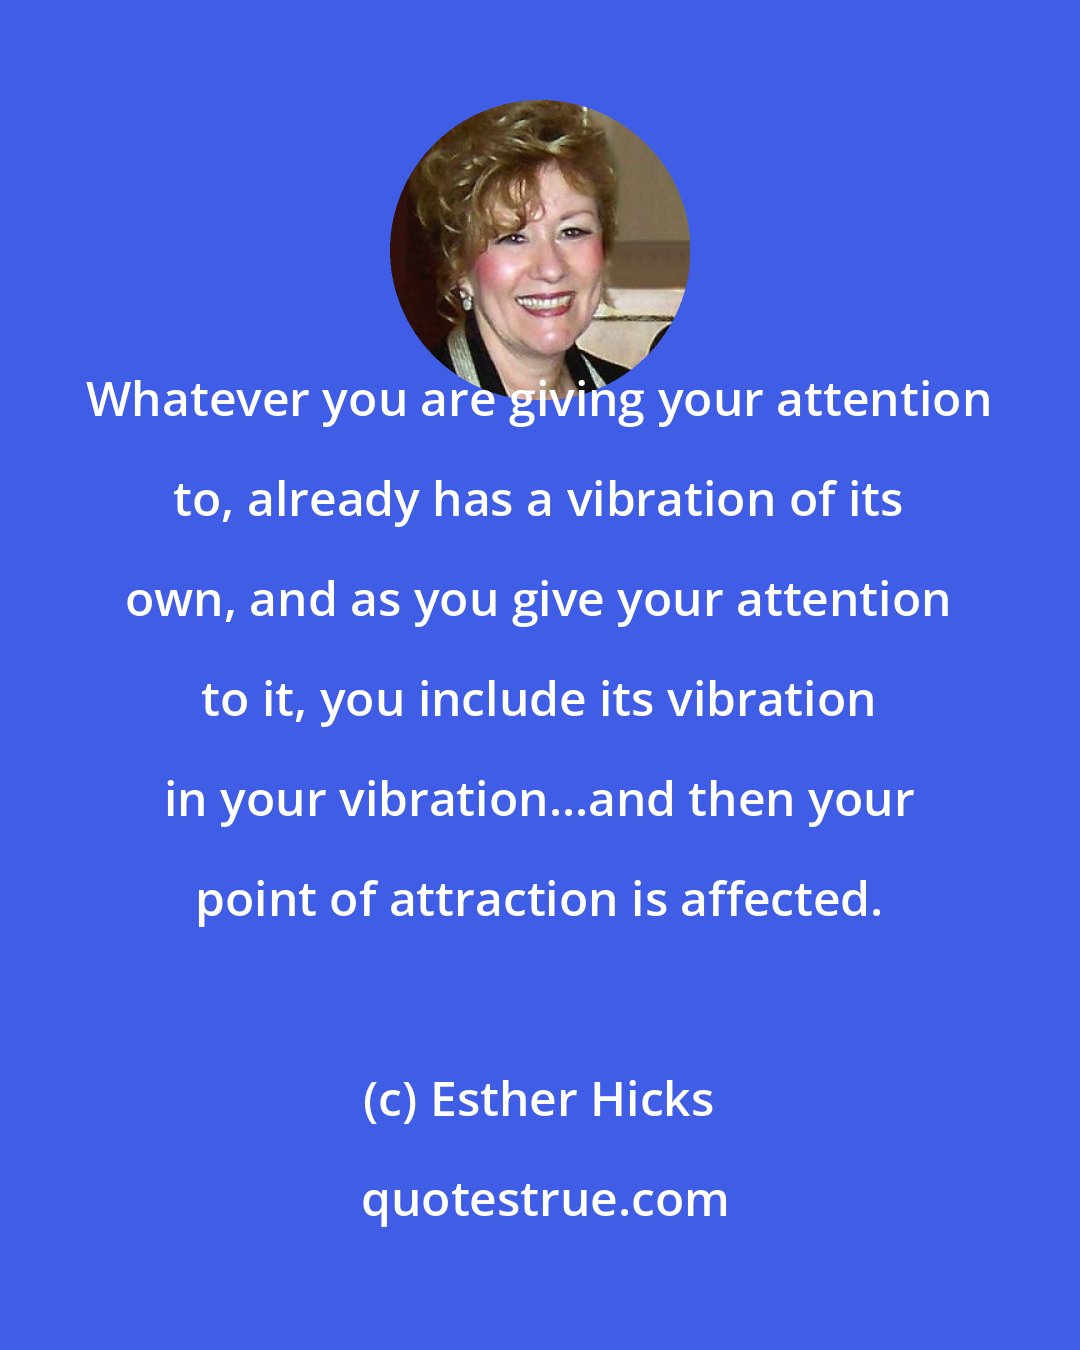 Esther Hicks: Whatever you are giving your attention to, already has a vibration of its own, and as you give your attention to it, you include its vibration in your vibration...and then your point of attraction is affected.